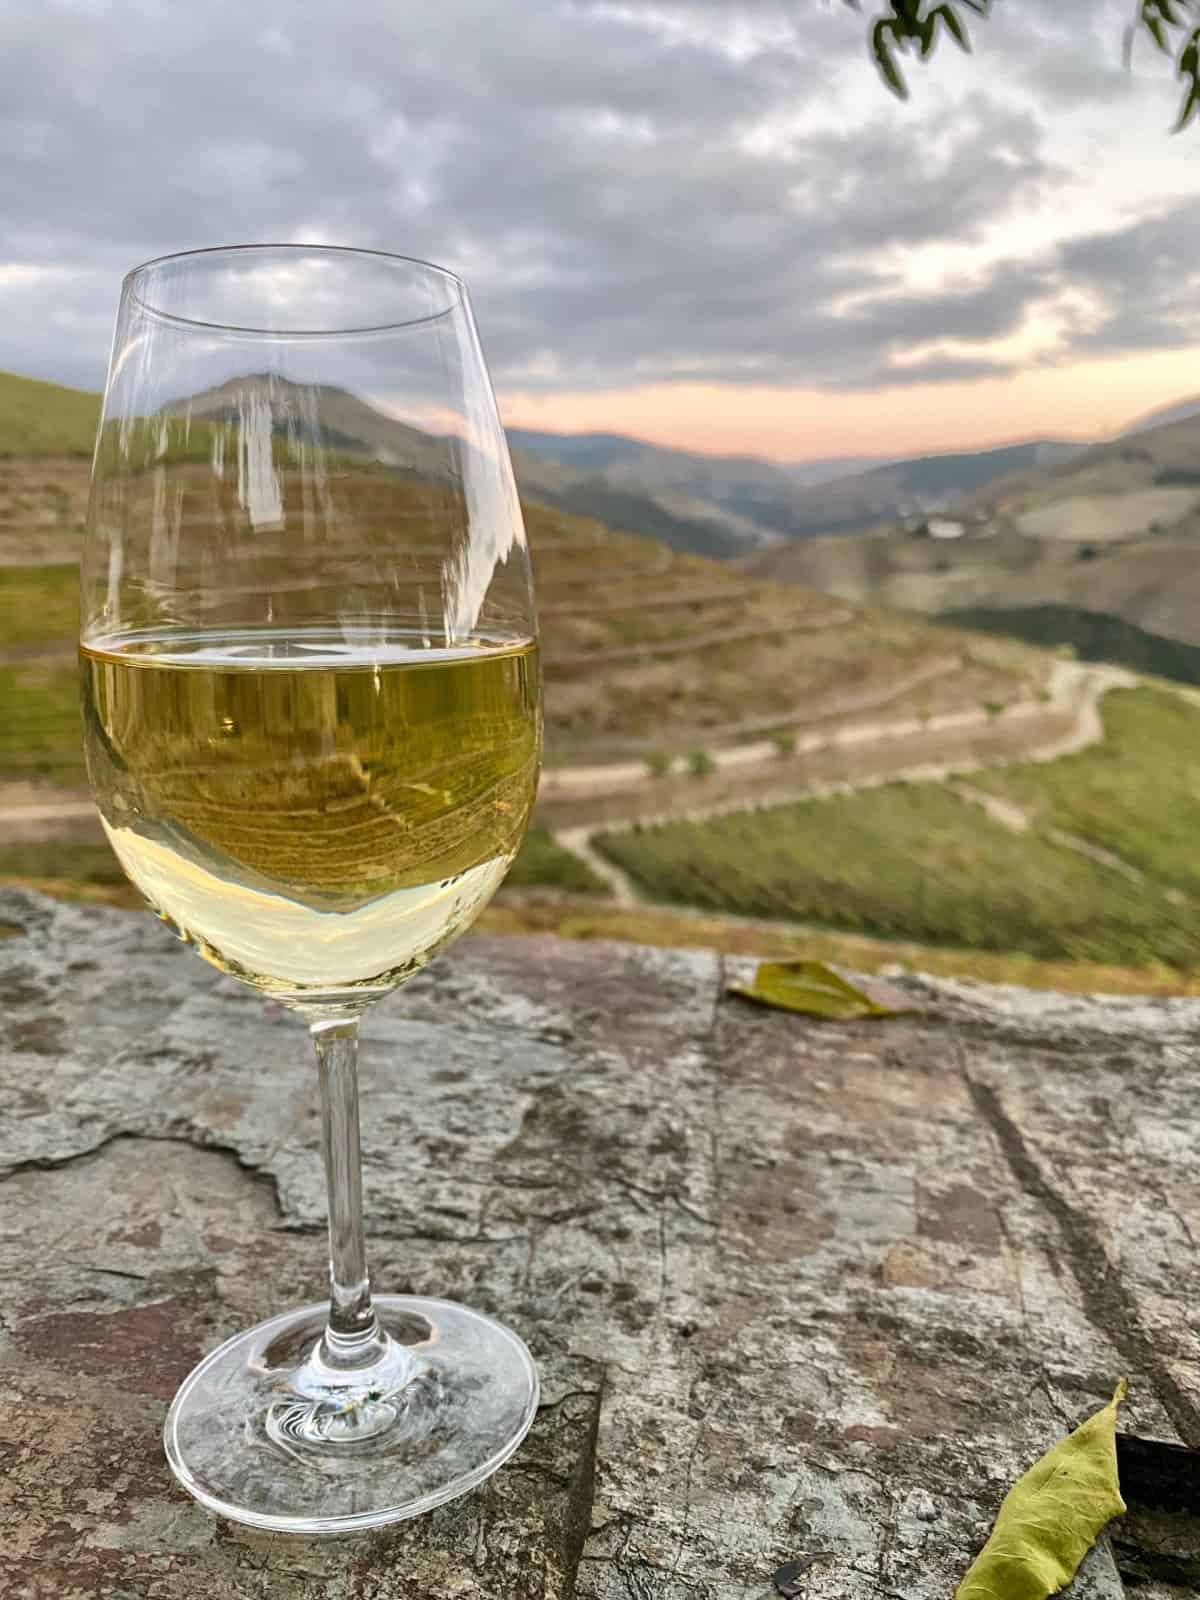 What to Do in the Douro Valley, Portugal | If you're visiting northern Portugal, the historic & gorgeous Douro Valley wine region is a must-visit. Here's a guide to planning an amazing Douro Valley itinerary, what to do in the Douro Valley, best wineries, where to stay Douro Valley, history, culture, scenic viewpoints, & more! 